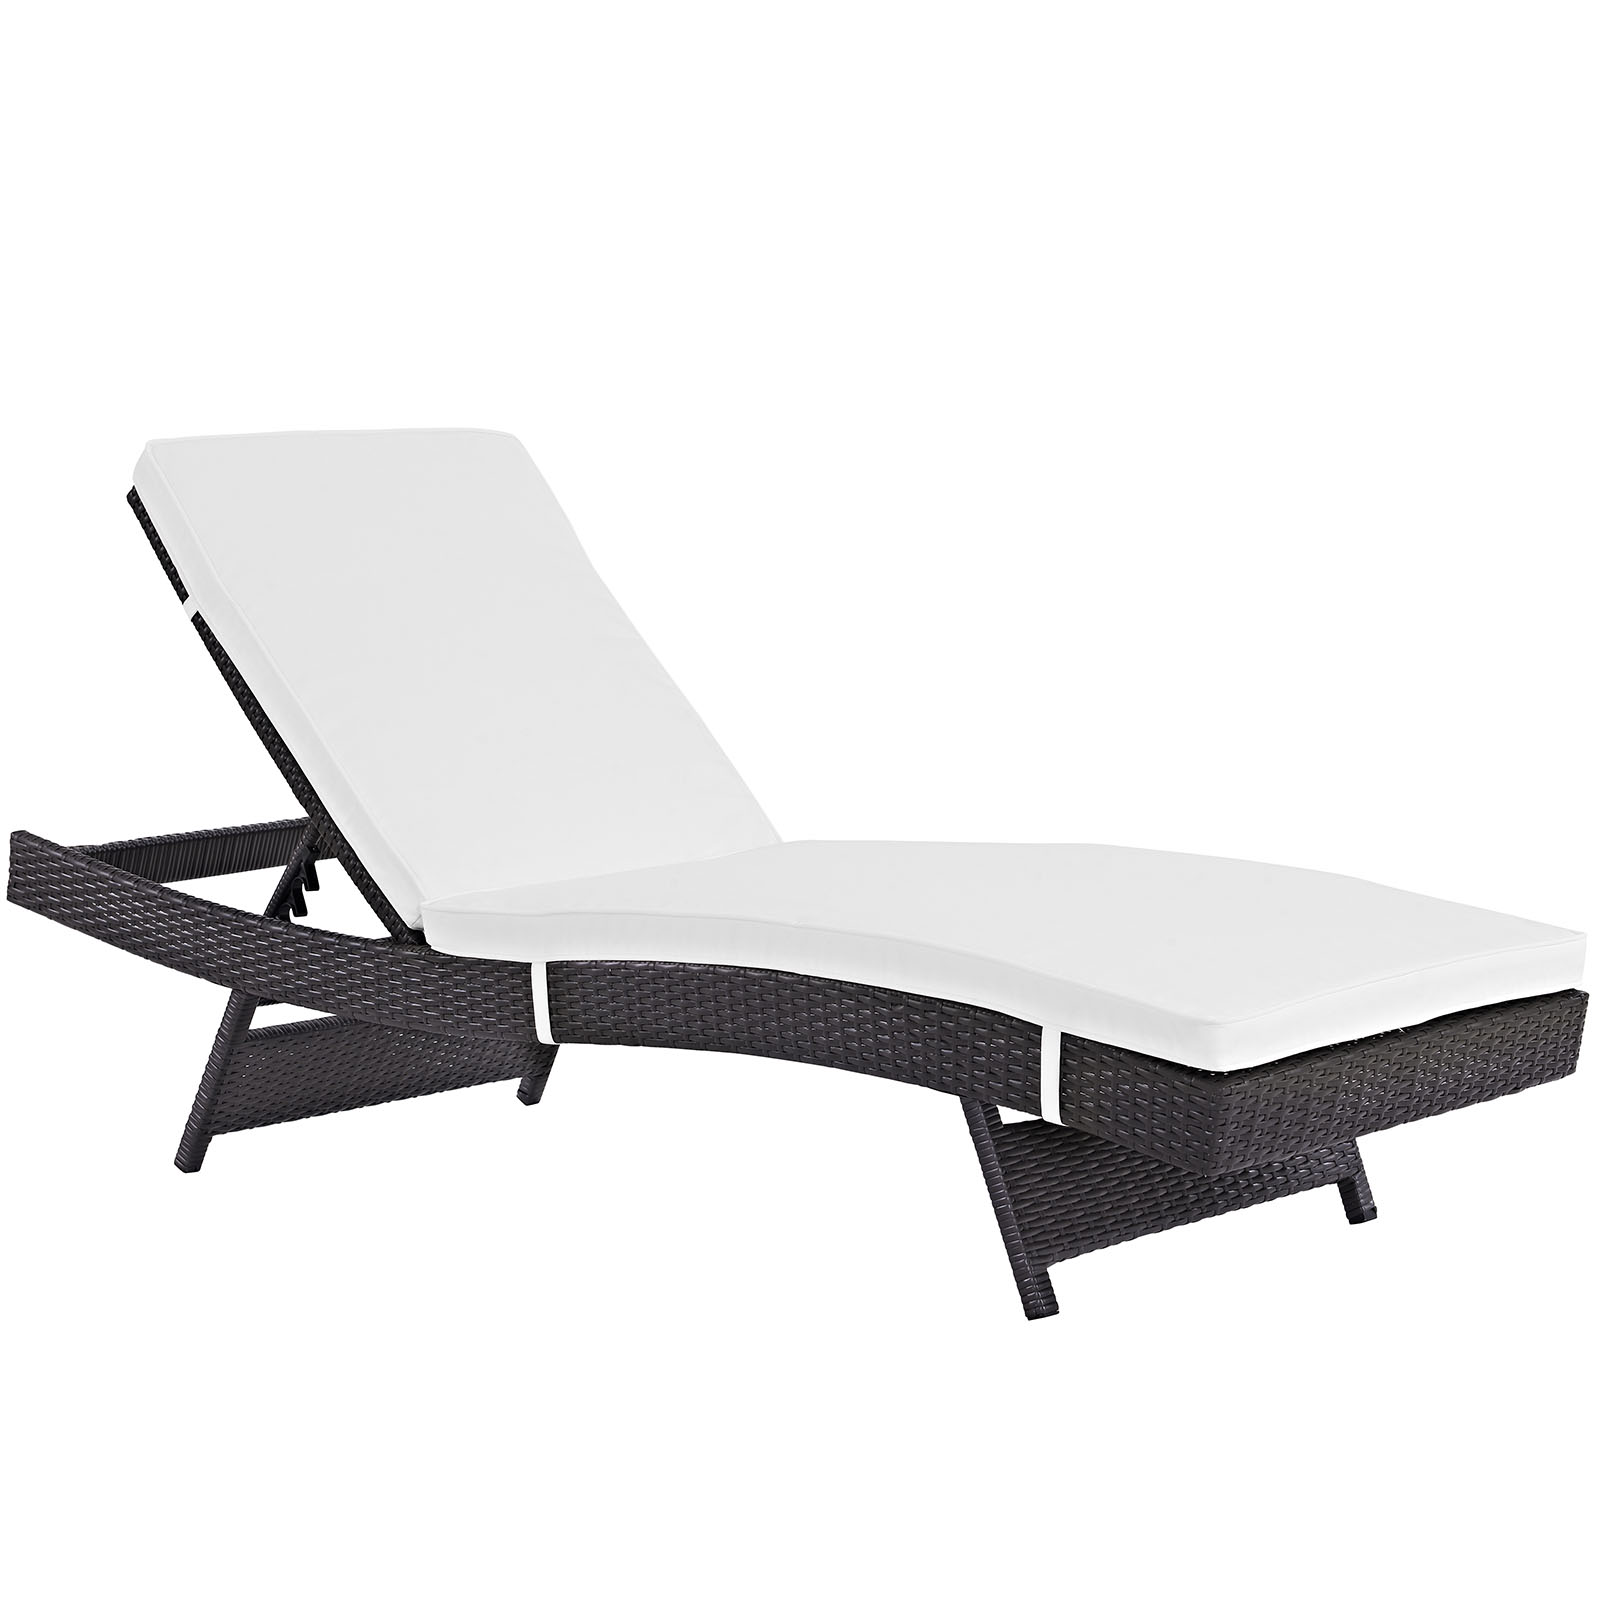 Modway Convene Chaise Outdoor Patio Set of 4 in Espresso White - image 3 of 5